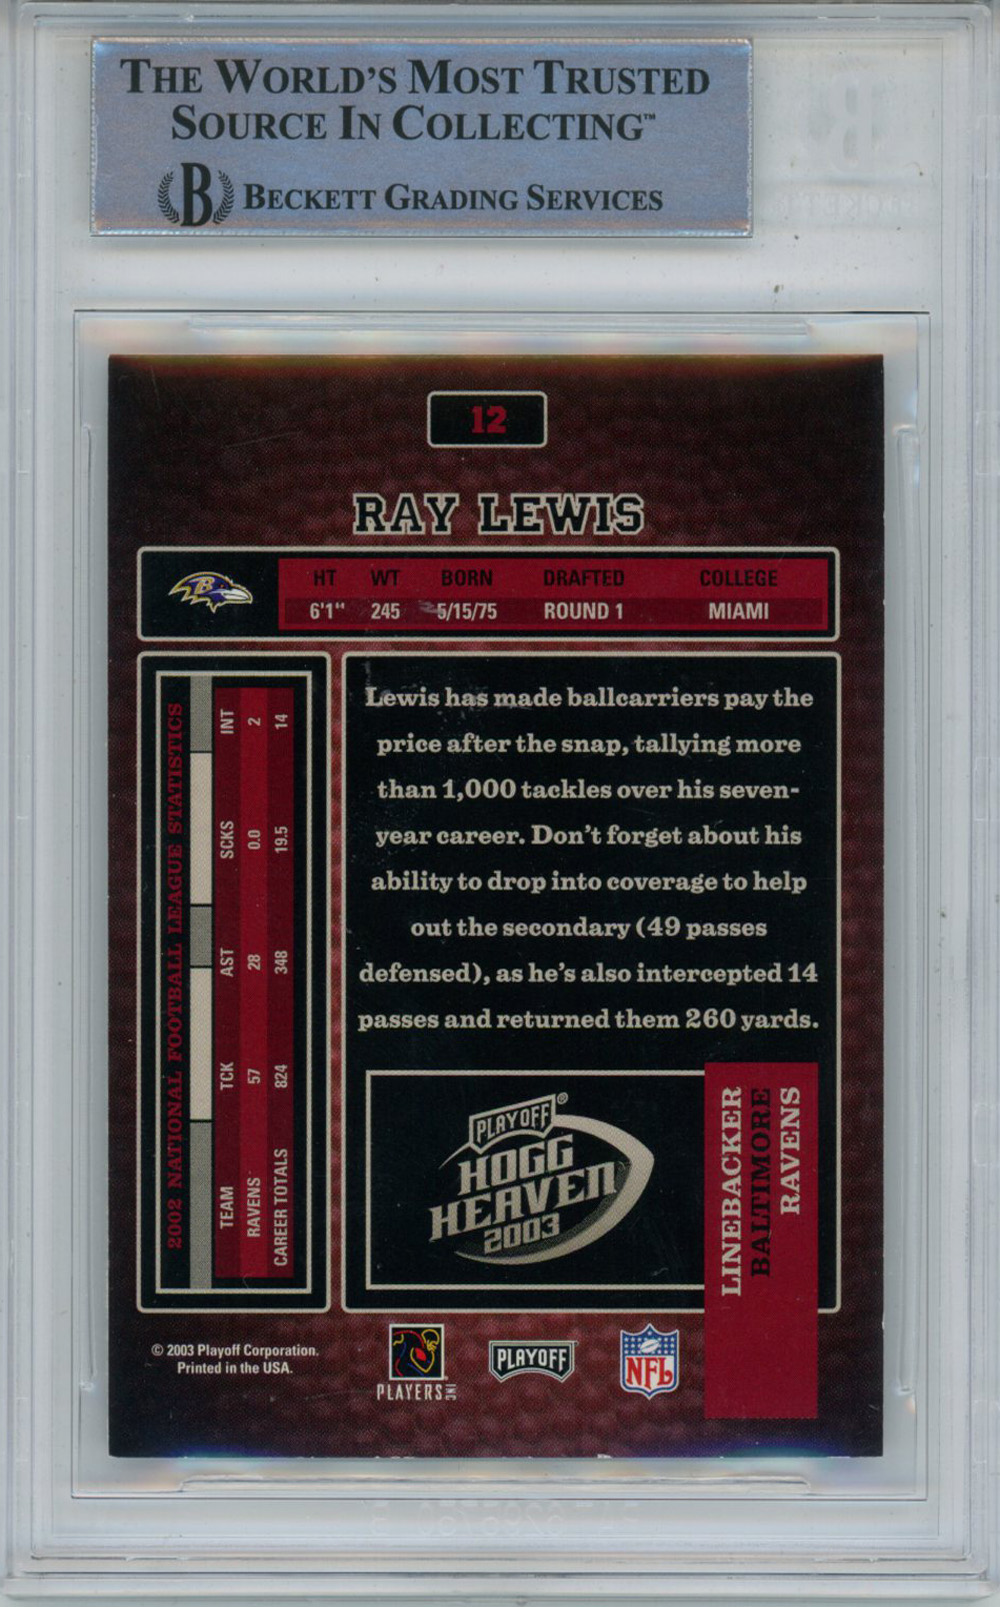 Ray Lewis Signed 2003 Playoff Hogg Heaven #12 Trading Card Beckett Slab